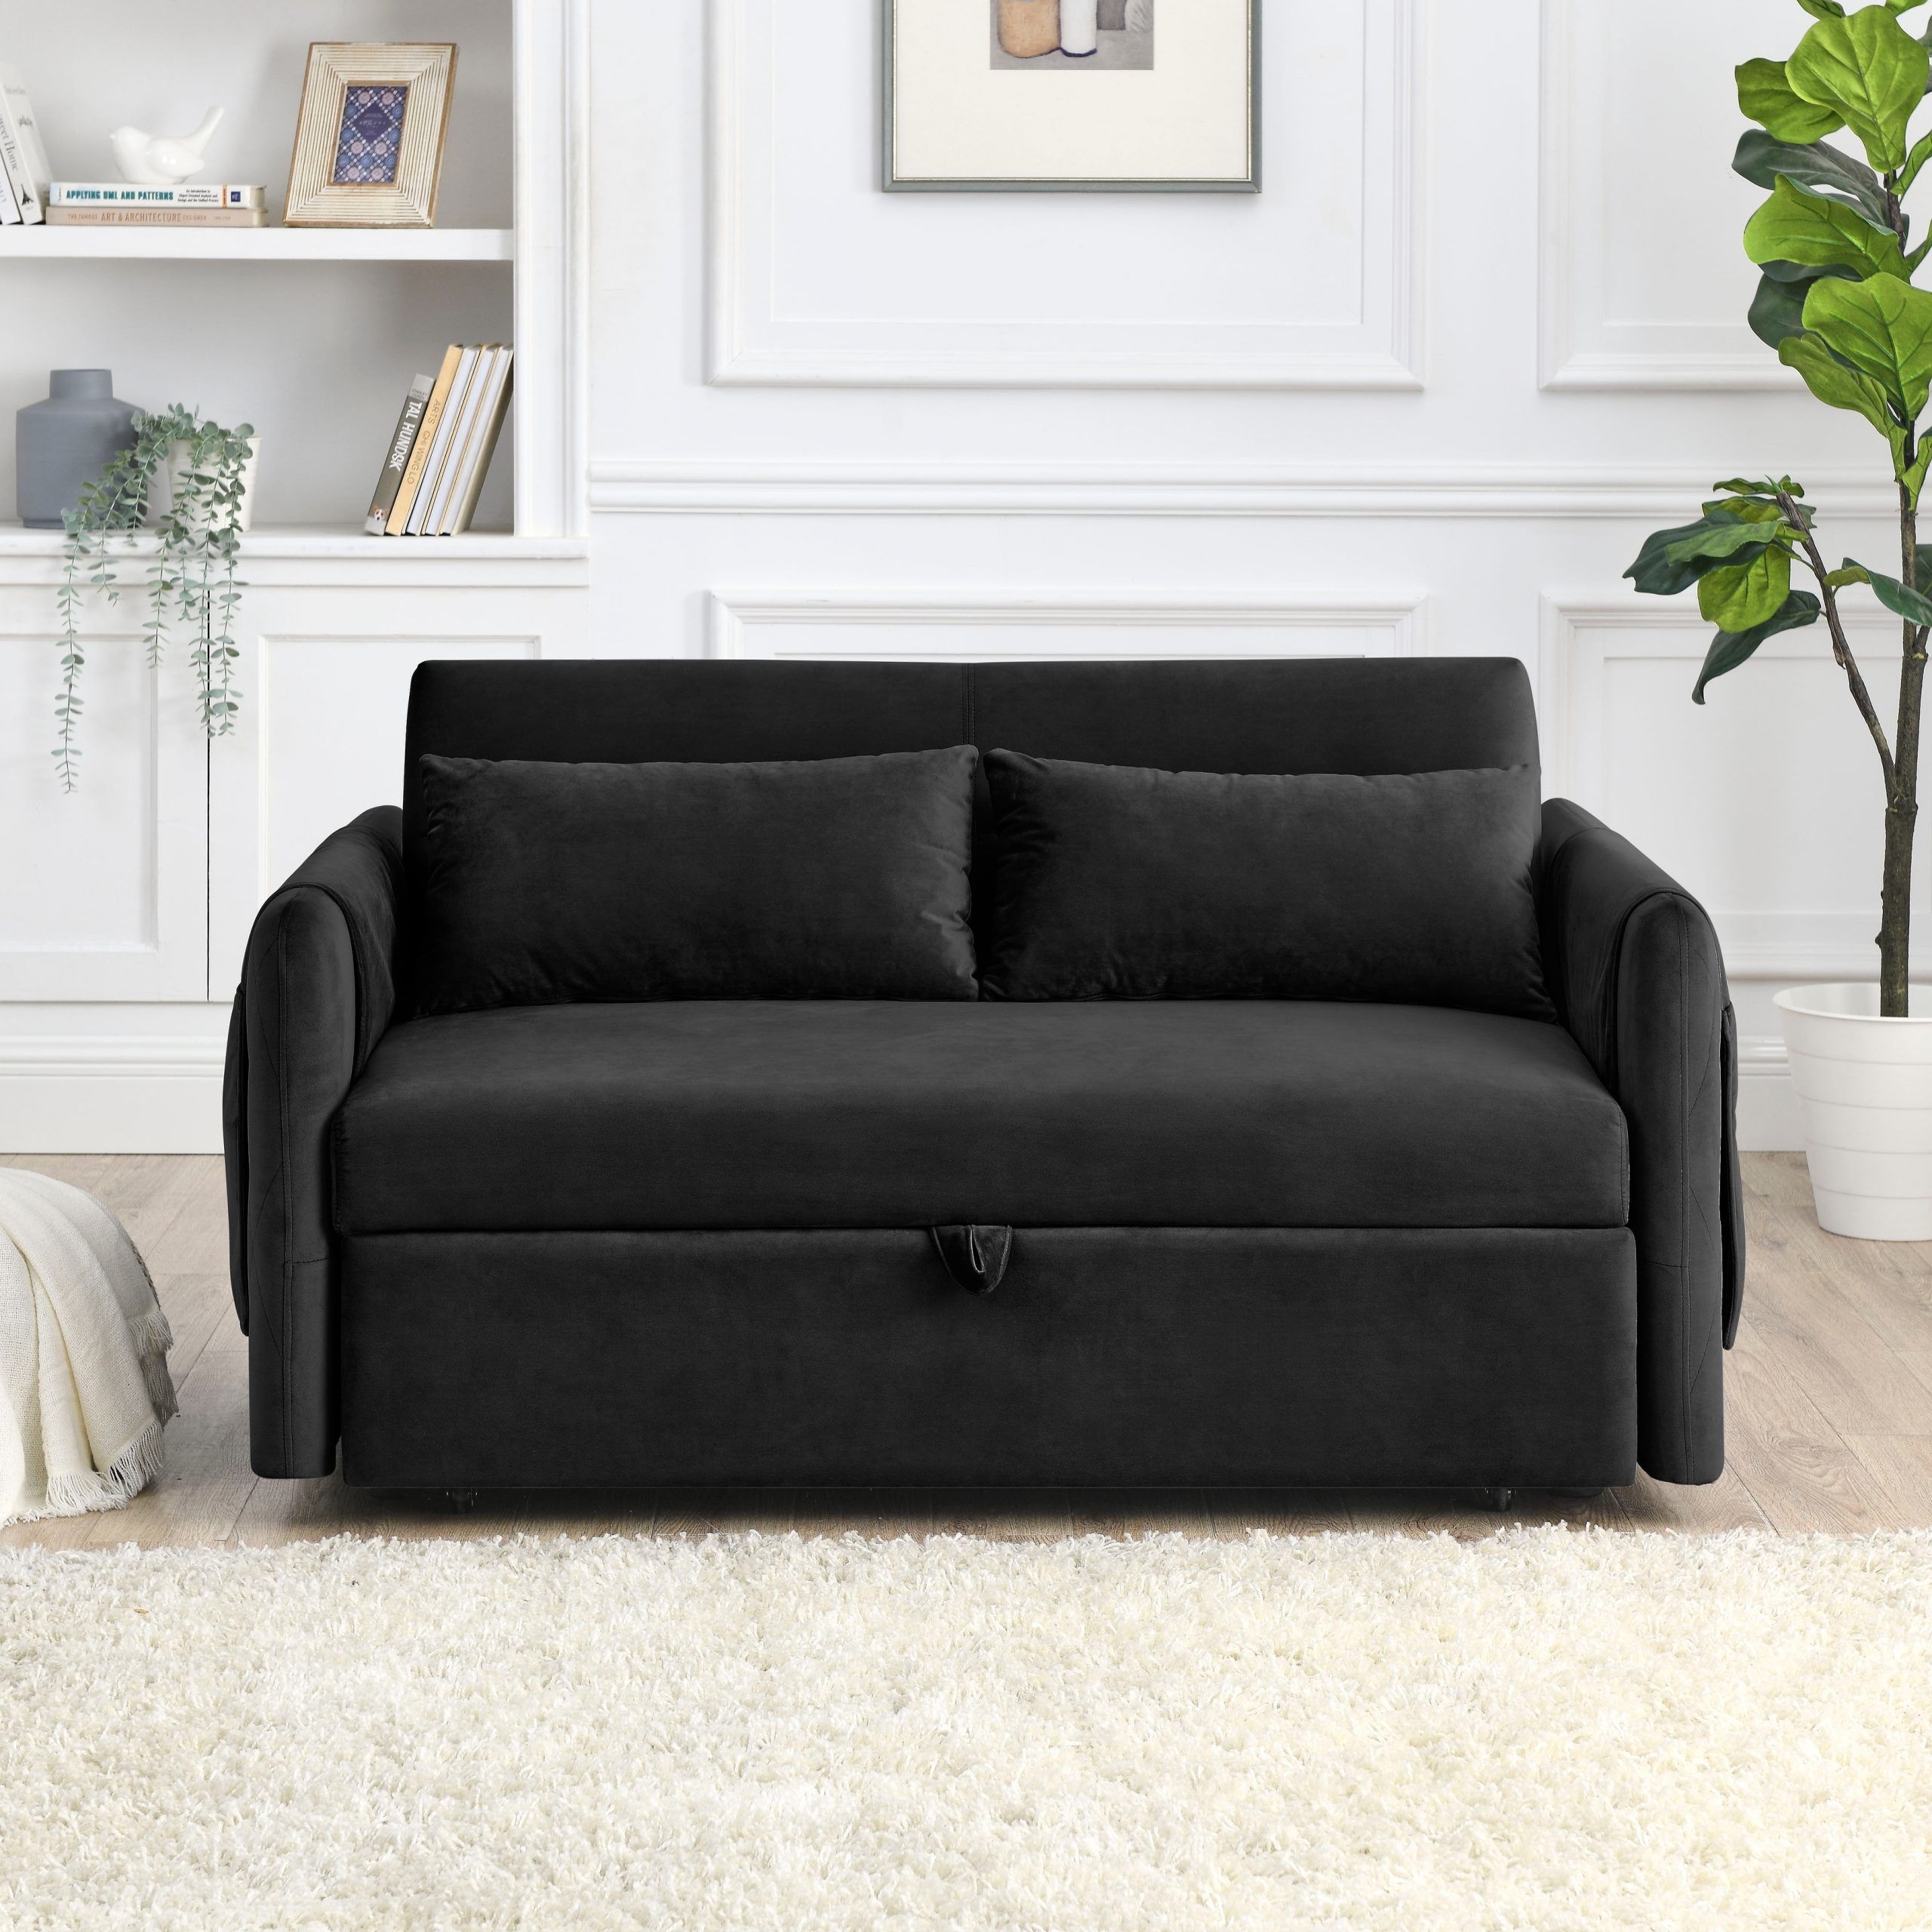 Velvet Loveseat Sofa With Pull Out Bed And 2 Pillow – On Sale – Bed Bath &  Beyond – 37157566 With Regard To Black Velvet 2 Seater Sofa Beds (View 11 of 15)